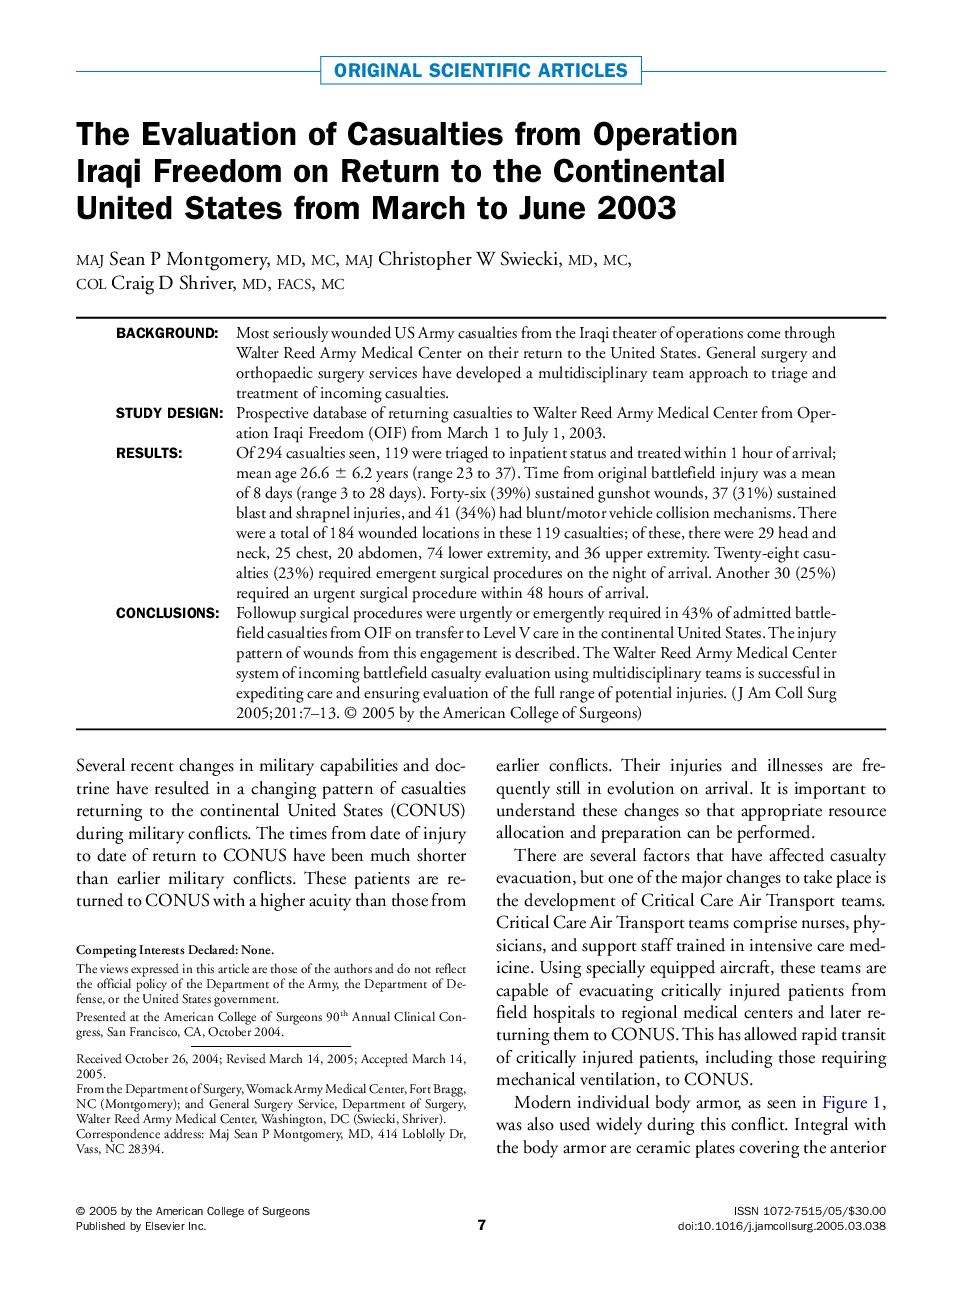 The Evaluation of Casualties from Operation Iraqi Freedom on Return to the Continental United States from March to June 2003